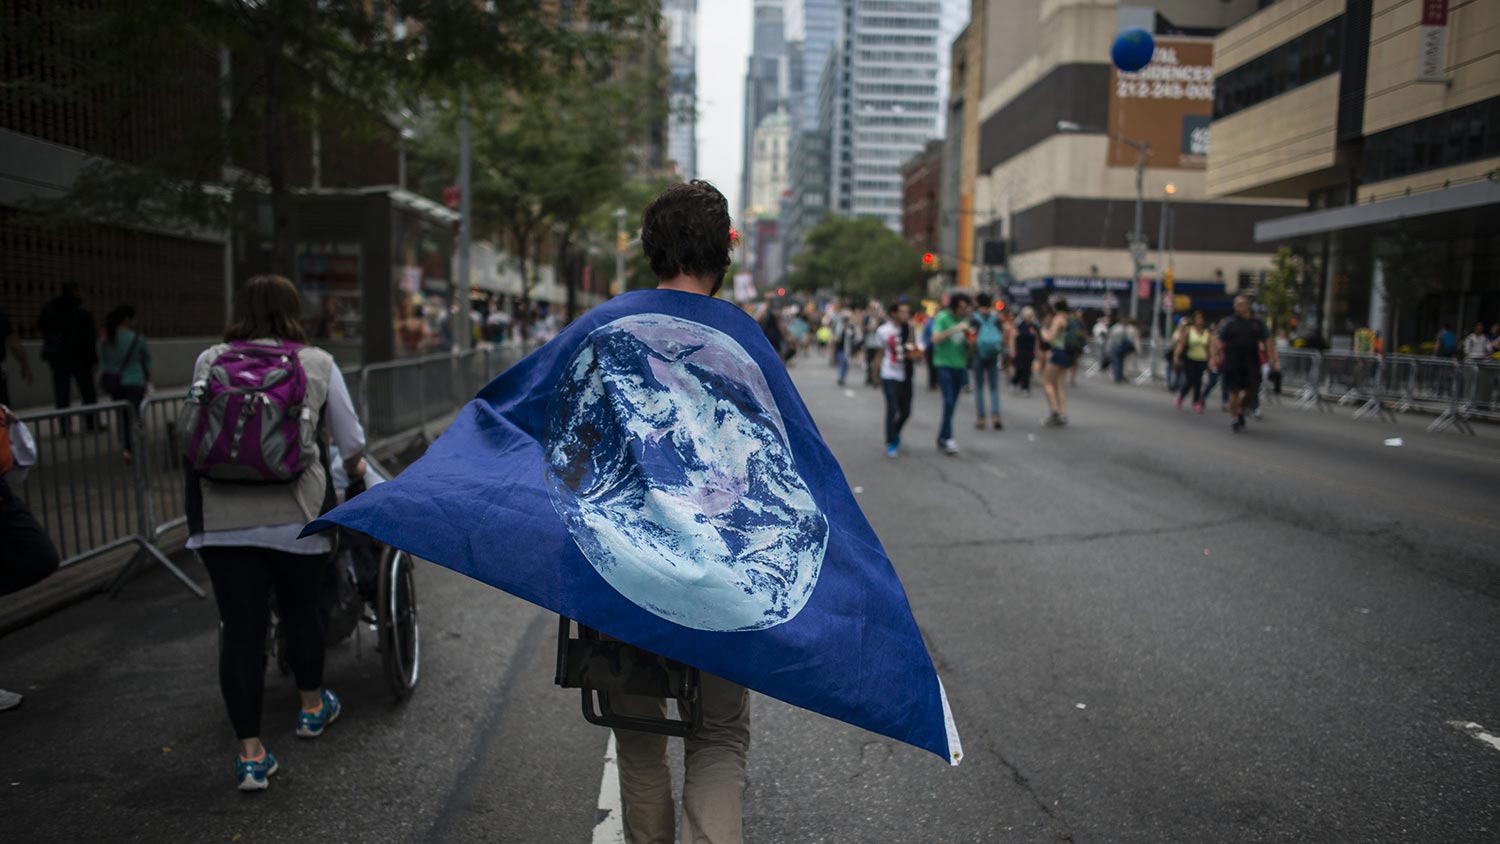 A demonstrator wears a flag as a cape during the People's Climate March in New York, U.S., on Sunday, Sept. 21, 2014.
